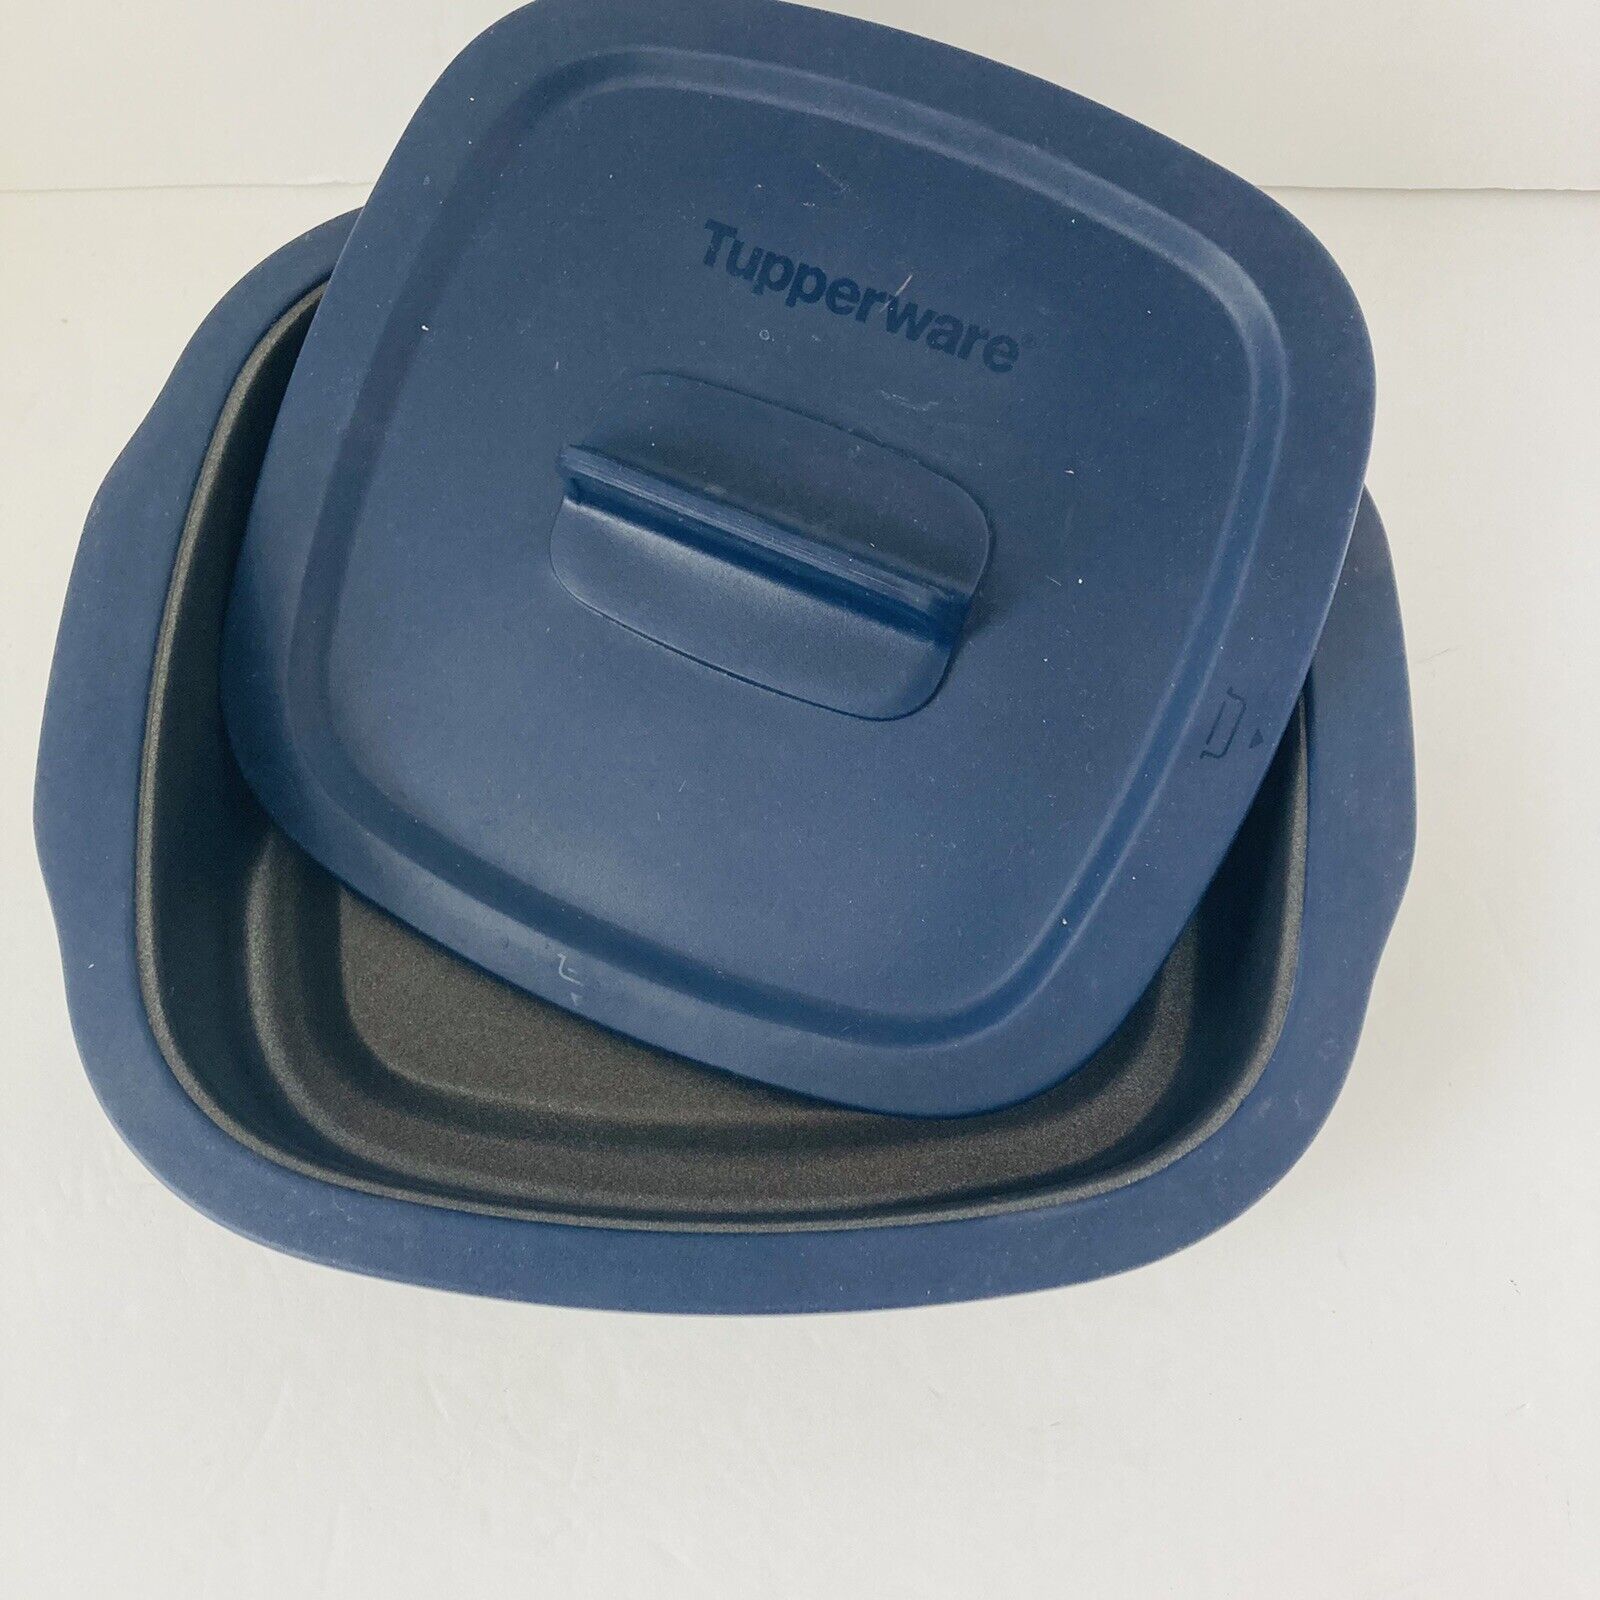 Tupperware MicroPro Series Base &Lid 8270D-1 Micro Pro Grill Microwave Non-Stick